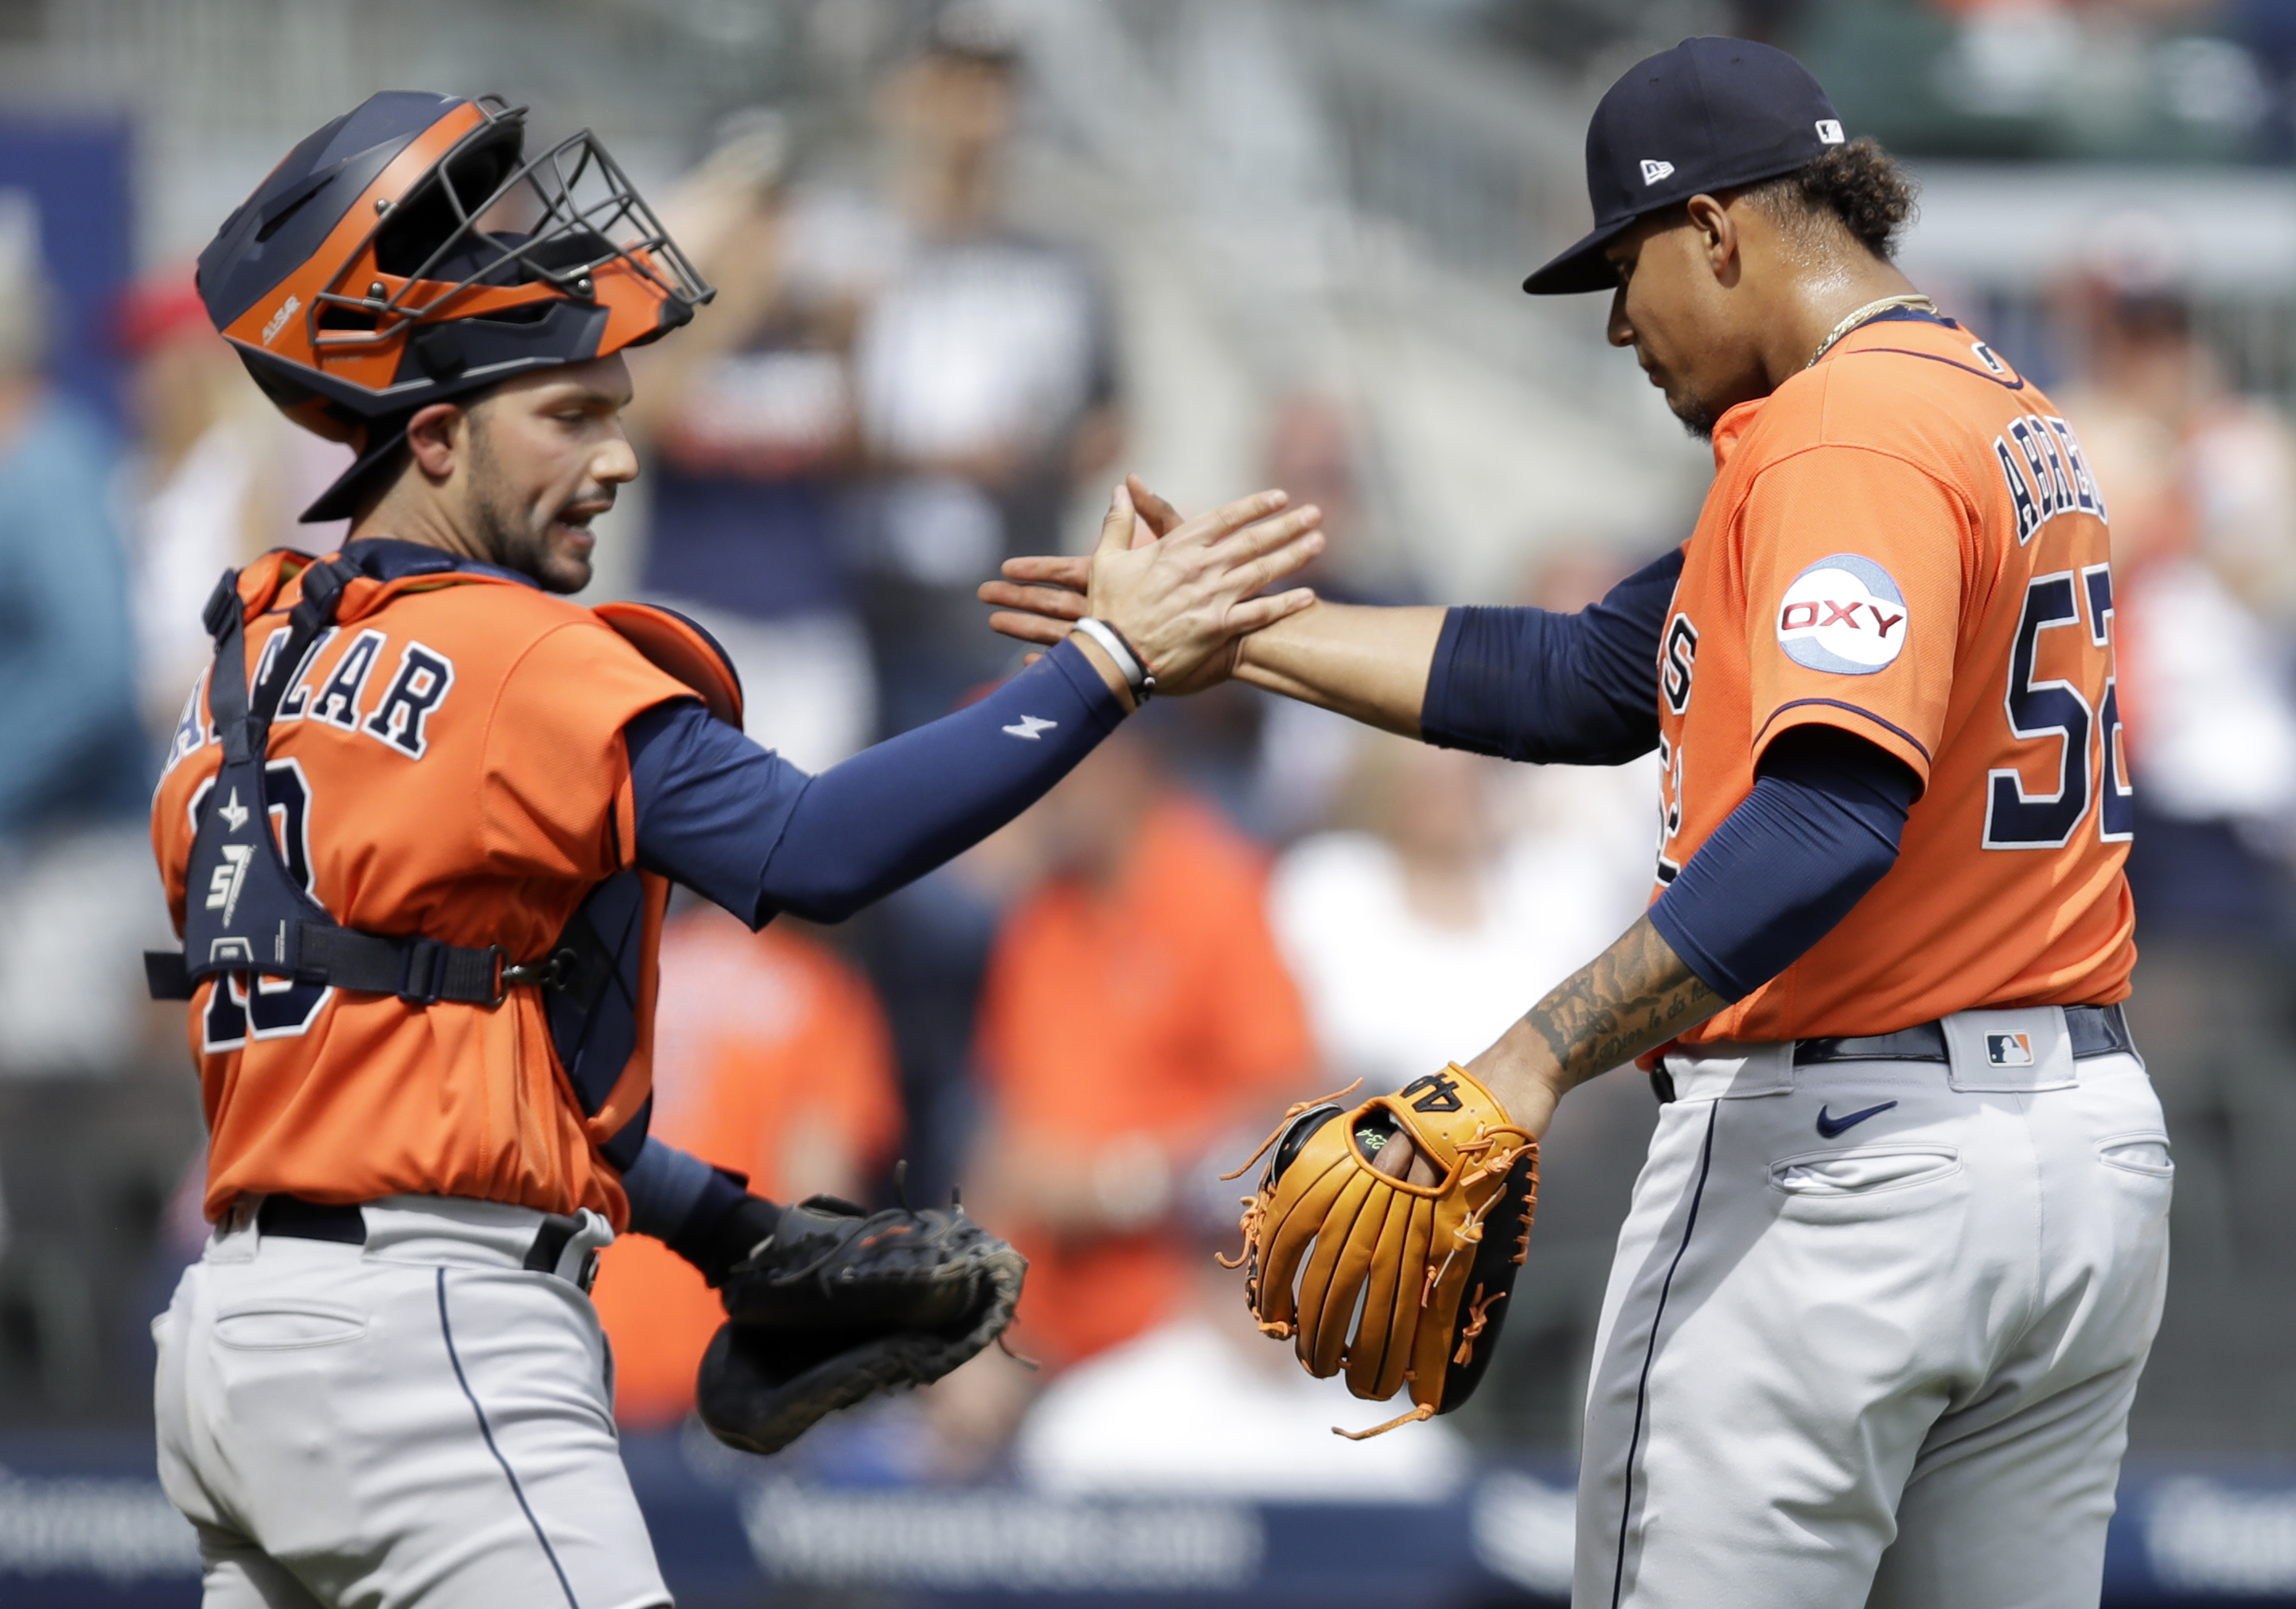 Bryan Abreu's strong start shows he's a weapon for the Astros' bullpen.